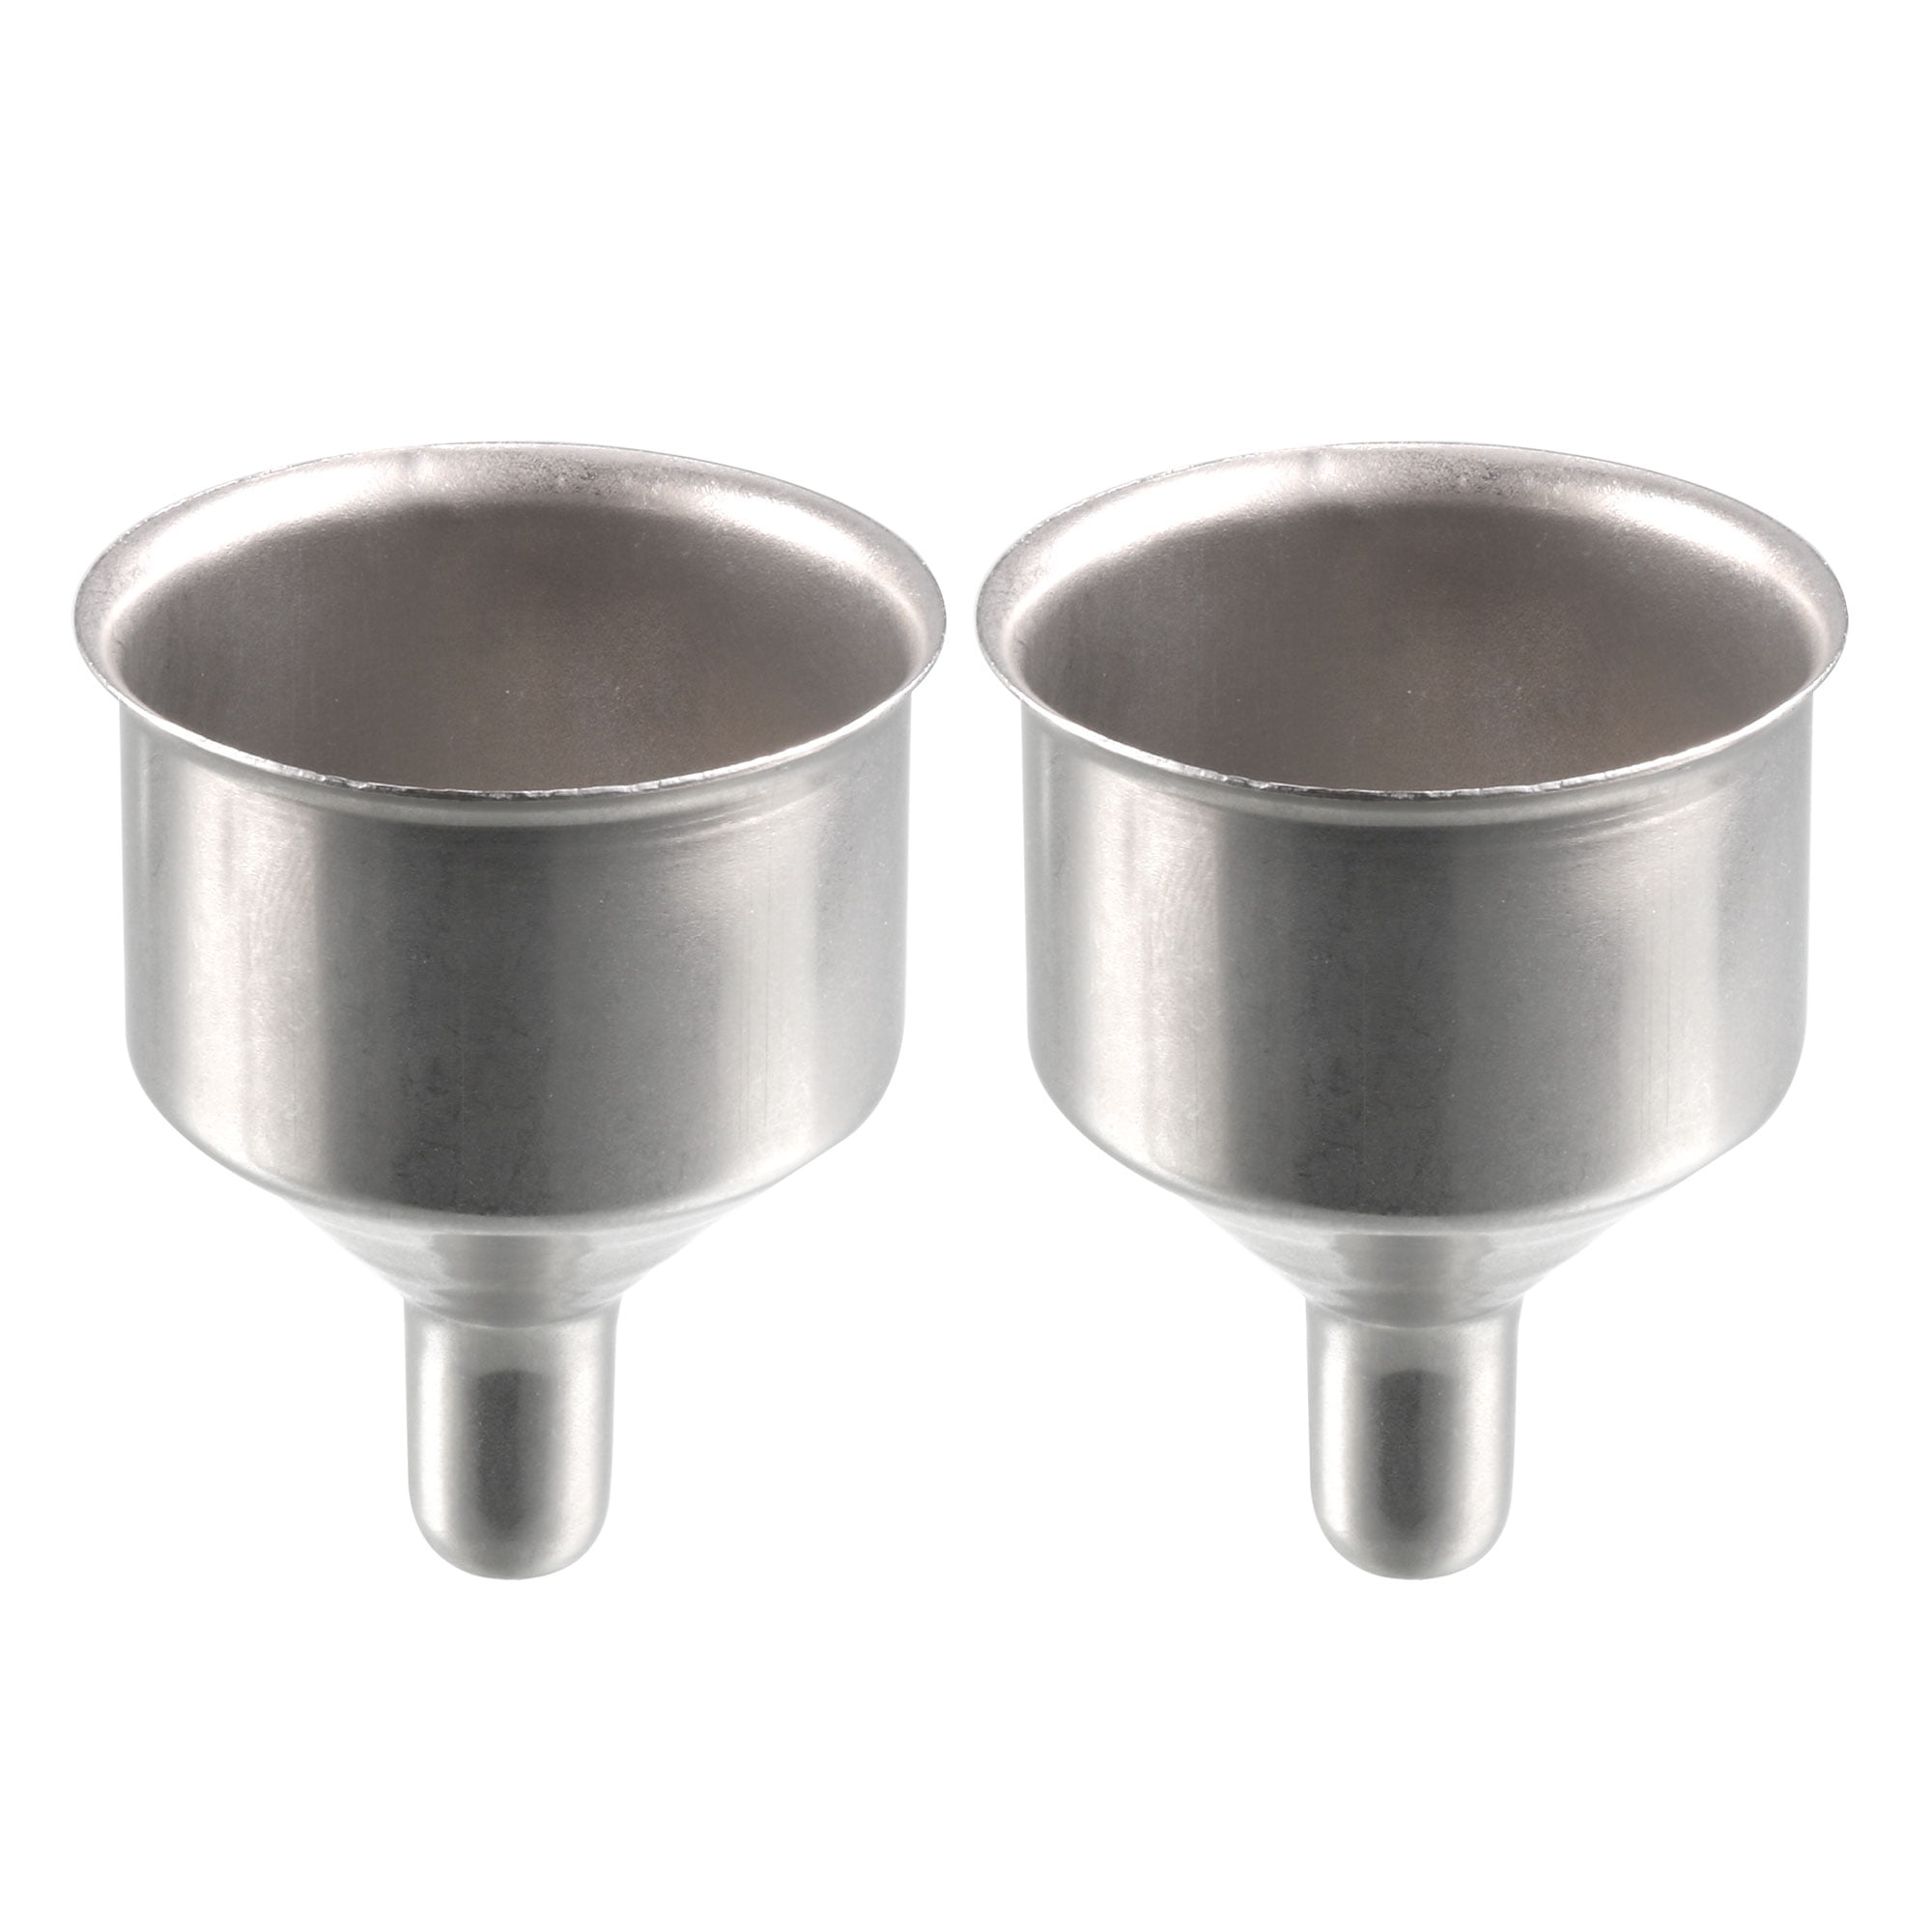 New Universal Stainless Steel Funnel 2 Inch for Filling Small Bottles Flasks Hot 